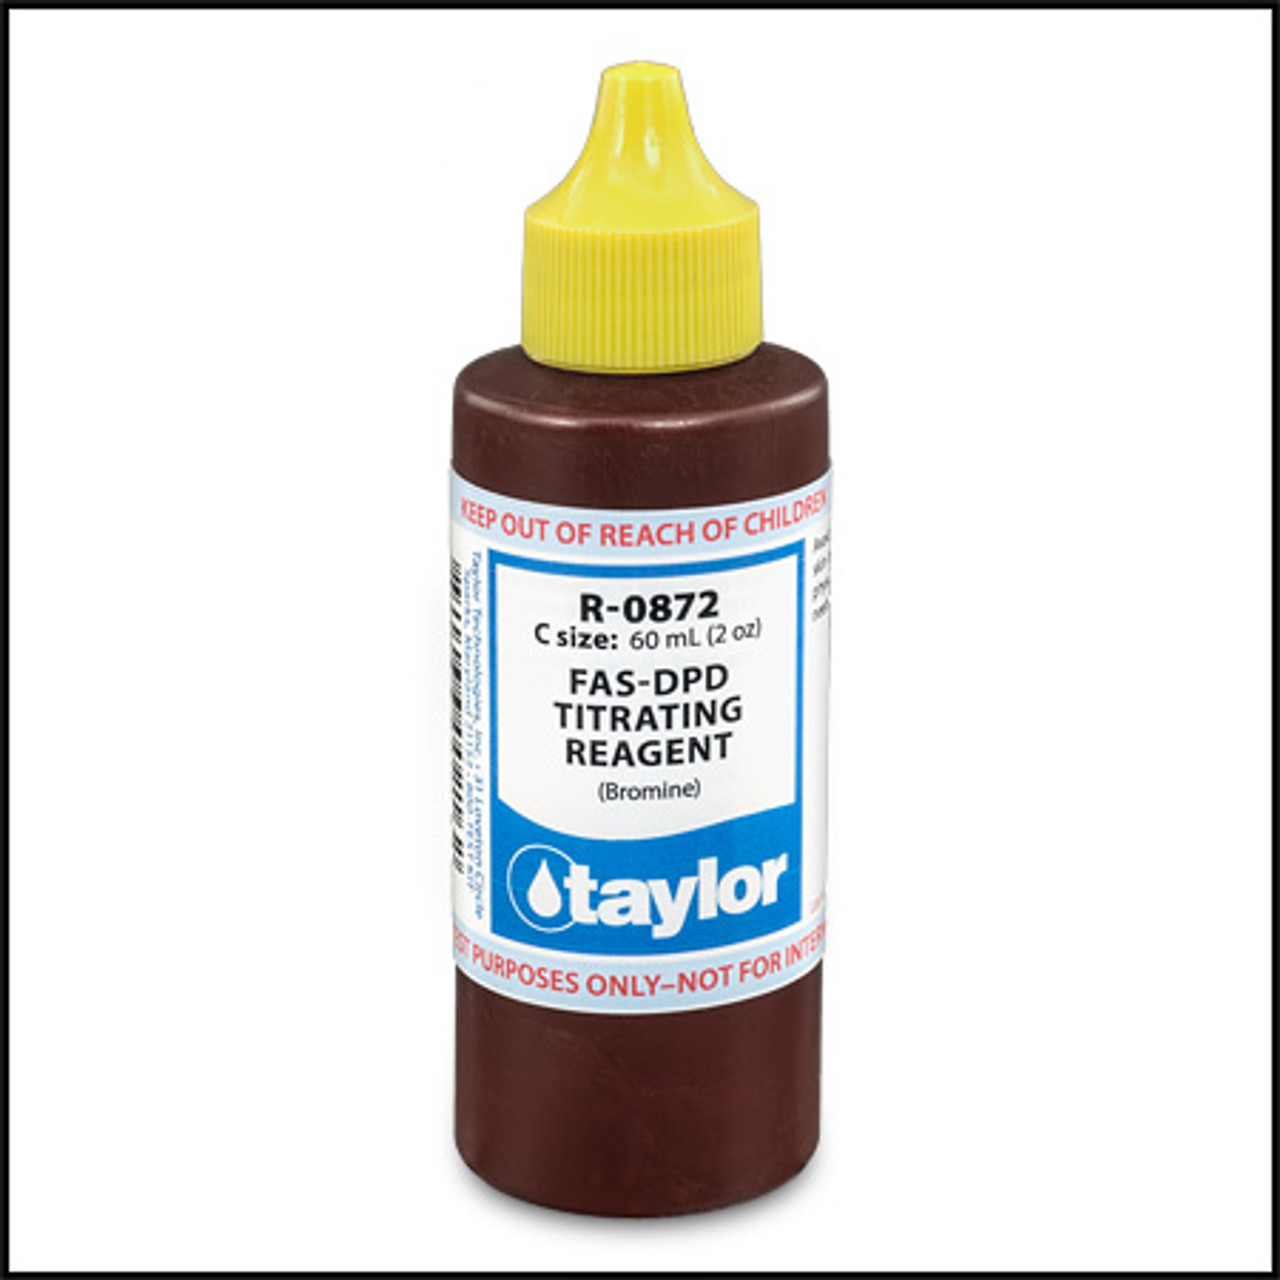 TAYLOR 2oz FAS-DPD TITRATING B1191 REAGENT (BROMINE)   R-0872-C-12 , R-0872-C-12